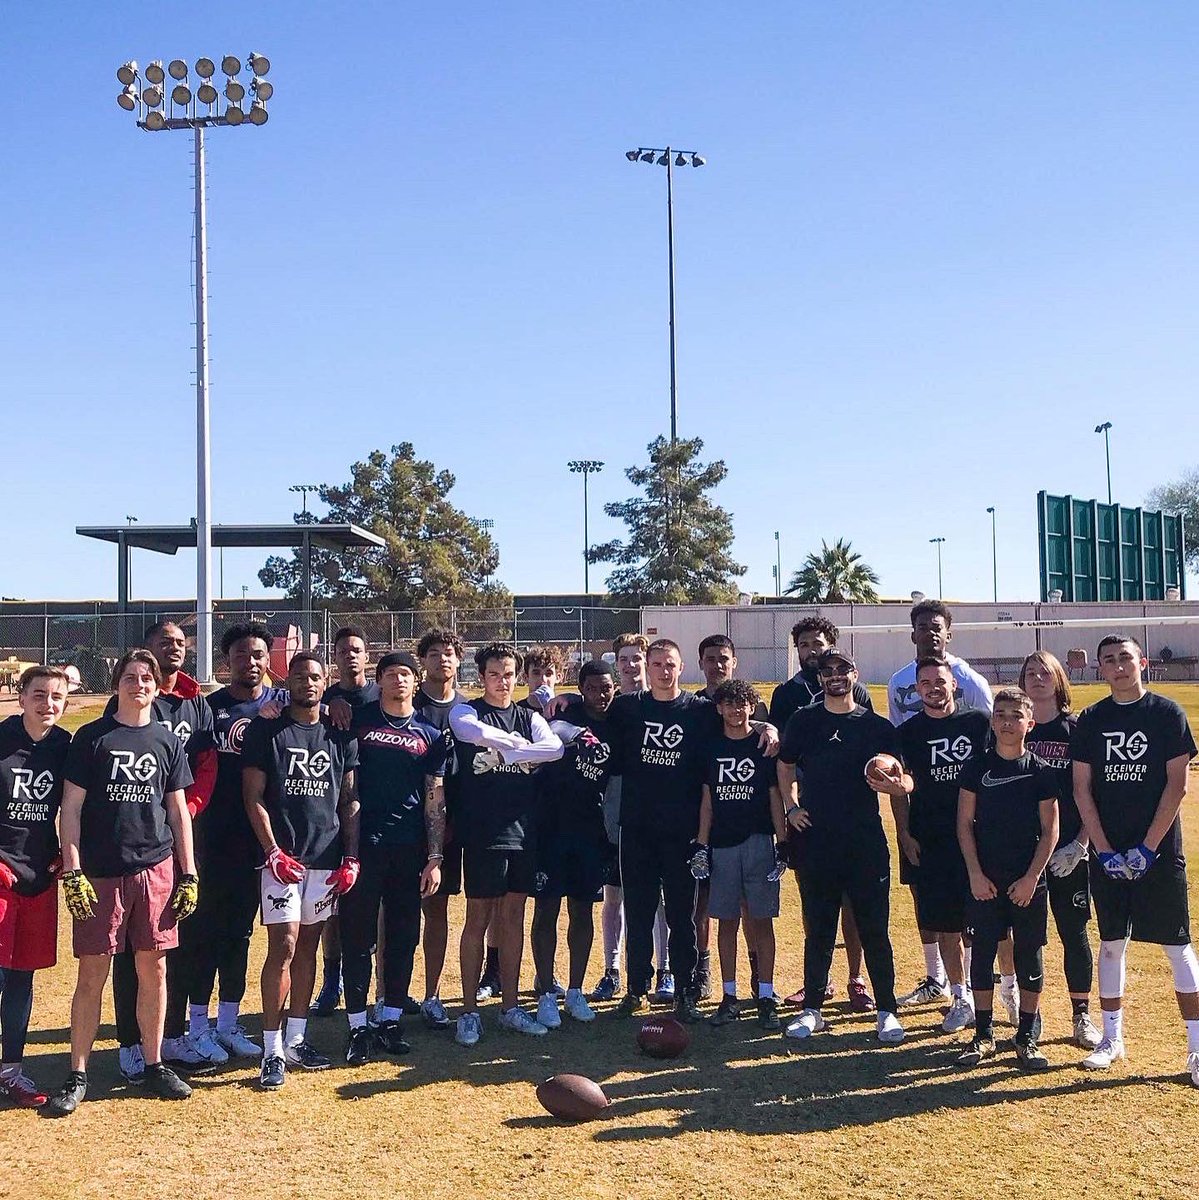 Arizona wide receiver camp at the end of the month 🏜